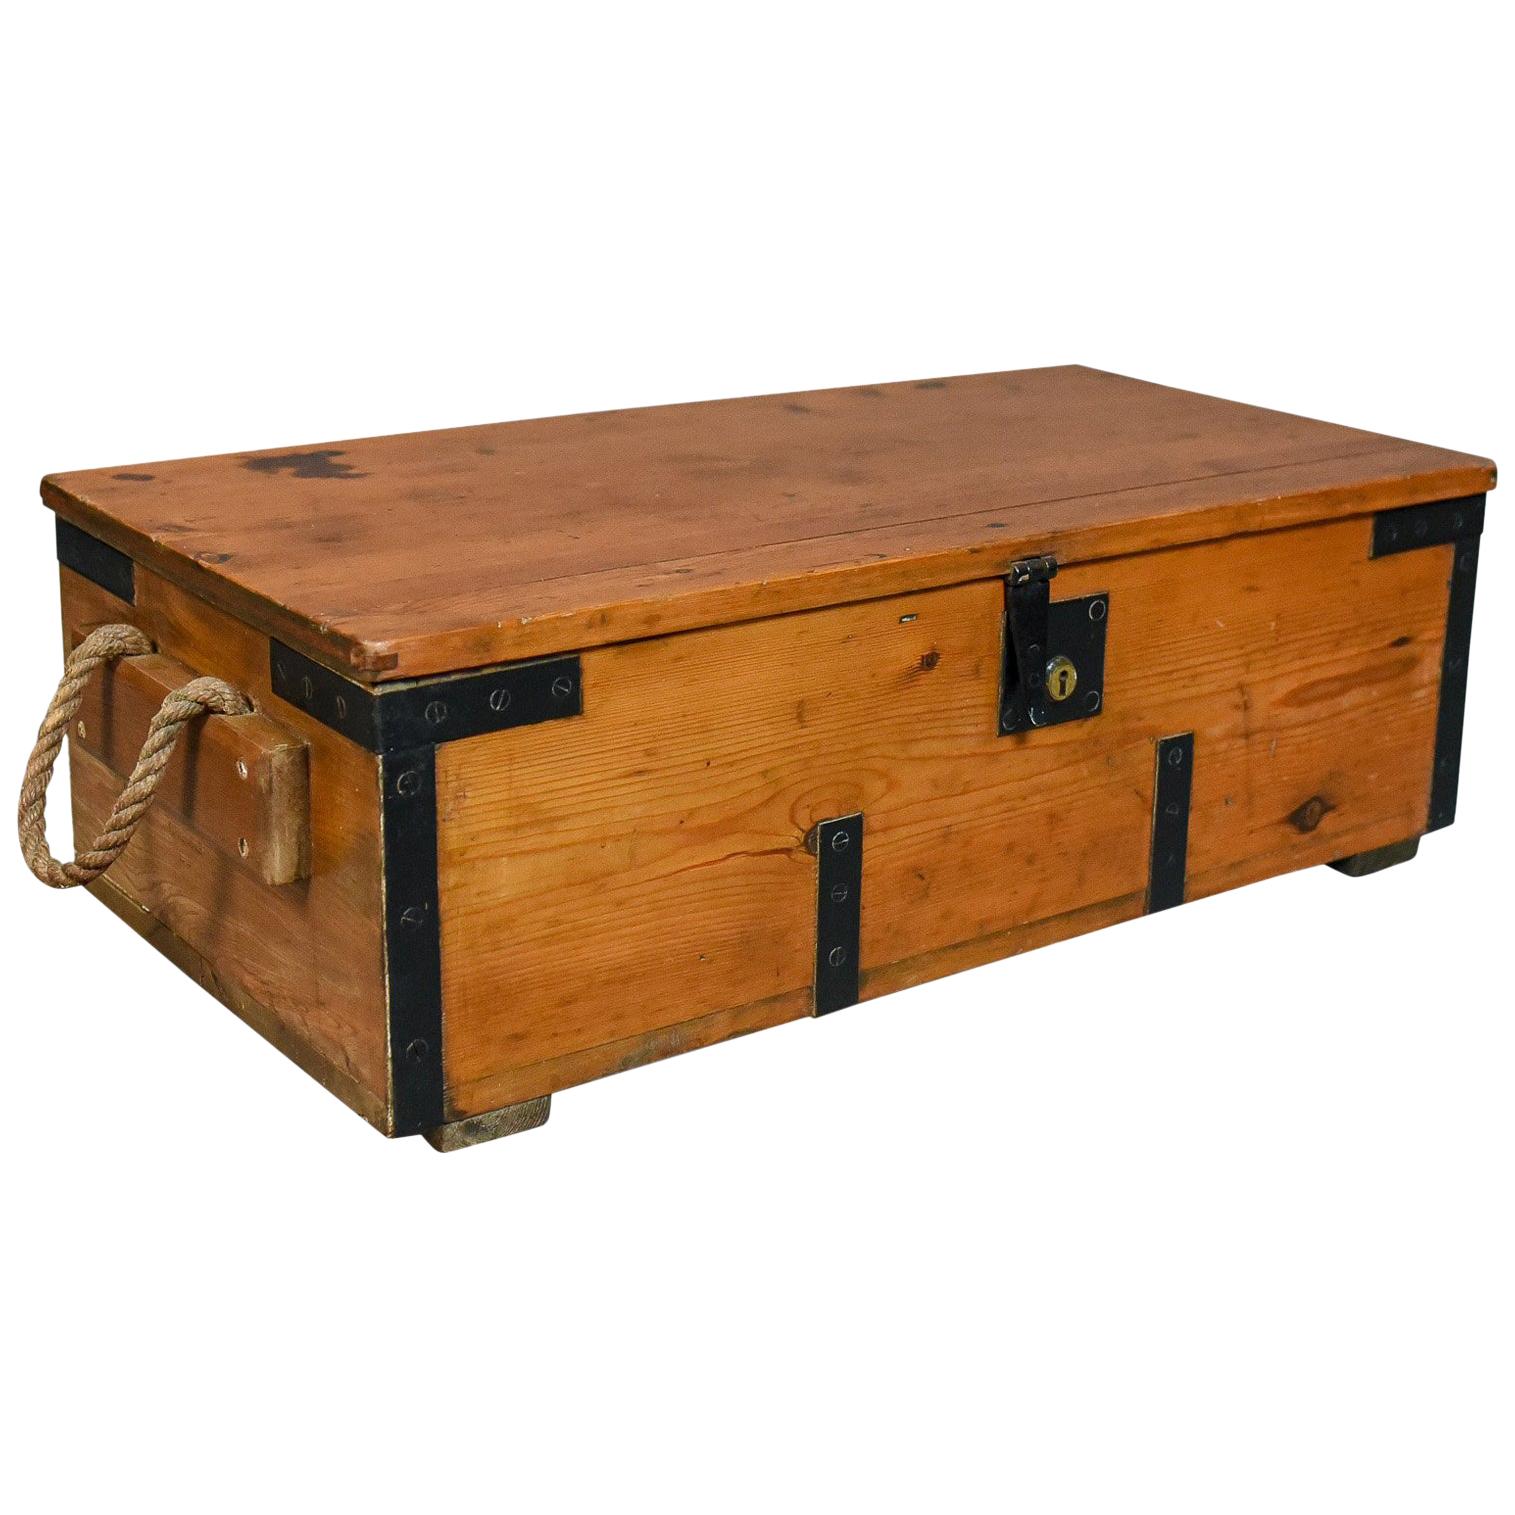 Antique Boat Builders Chest, English, Pitch Pine and Teak Trunk, circa 1900